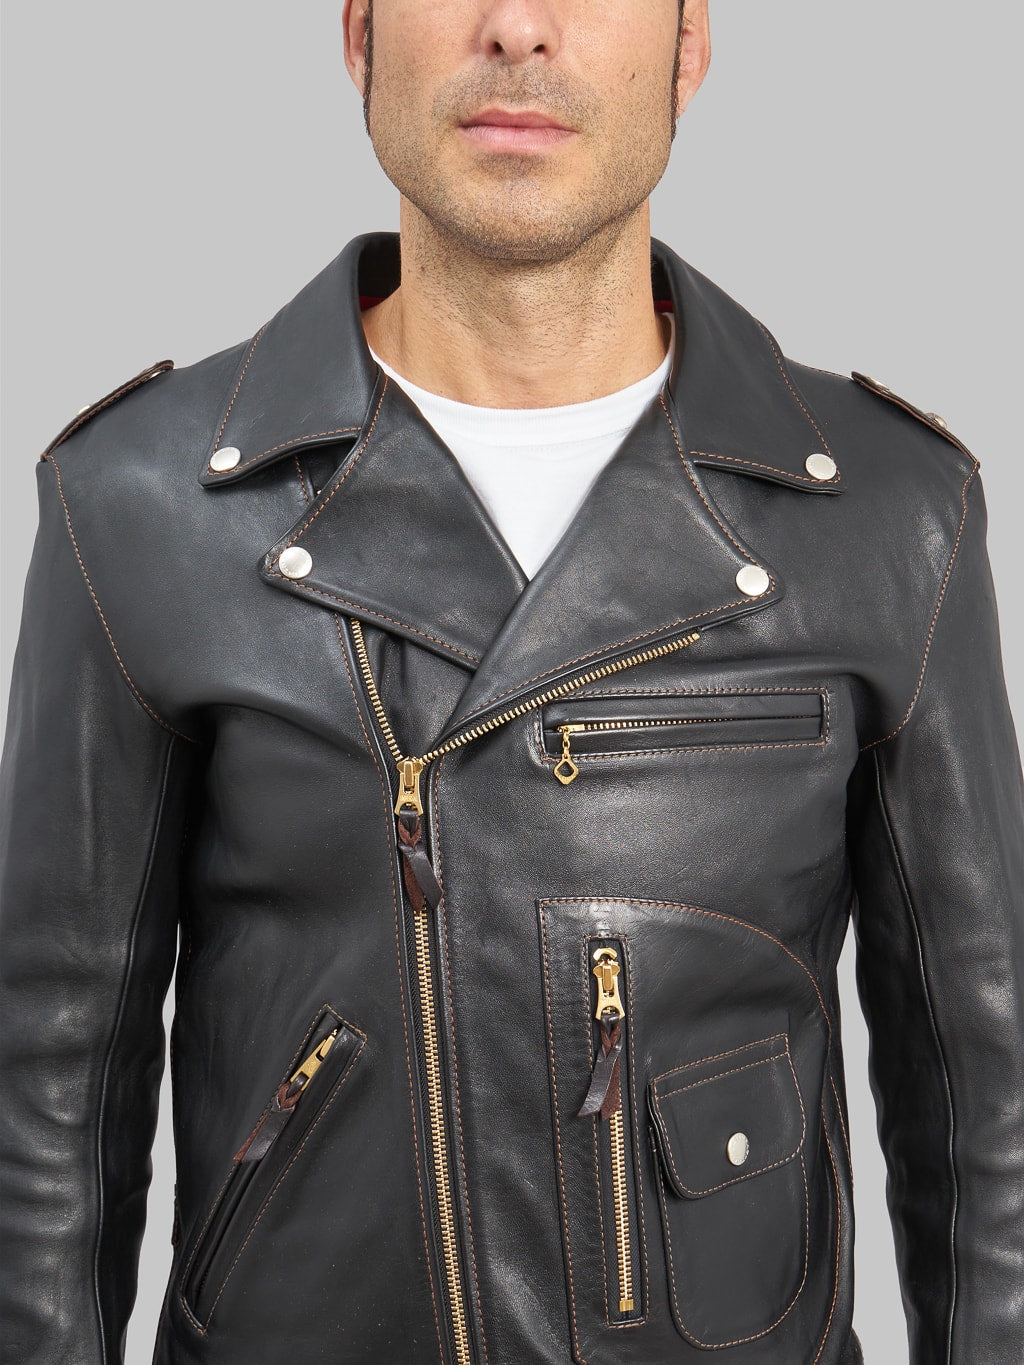 The Flat Head Horsehide Double Riders Jacket Black details